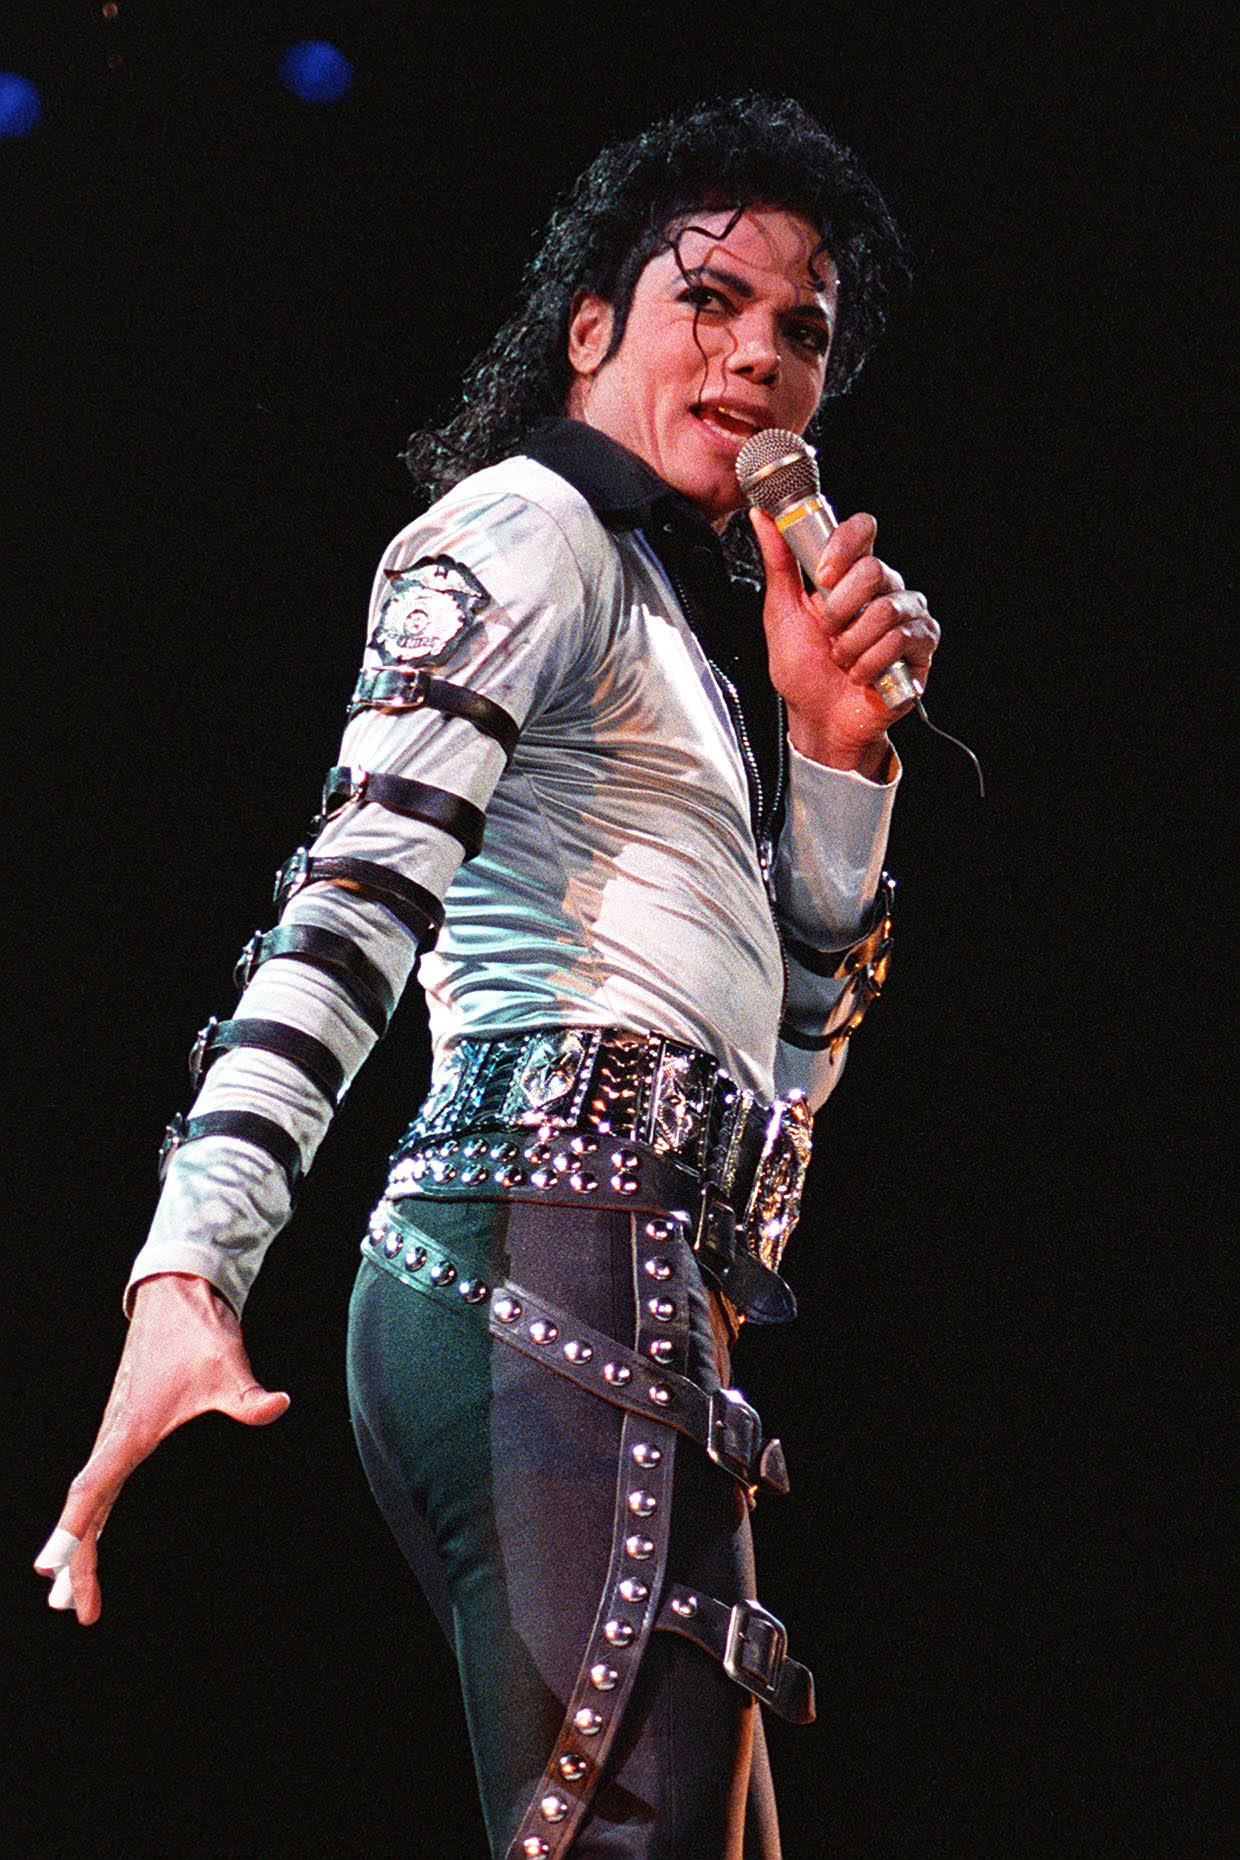 Michael Jackson is highly regarded as one of the greatest pop icons of all time